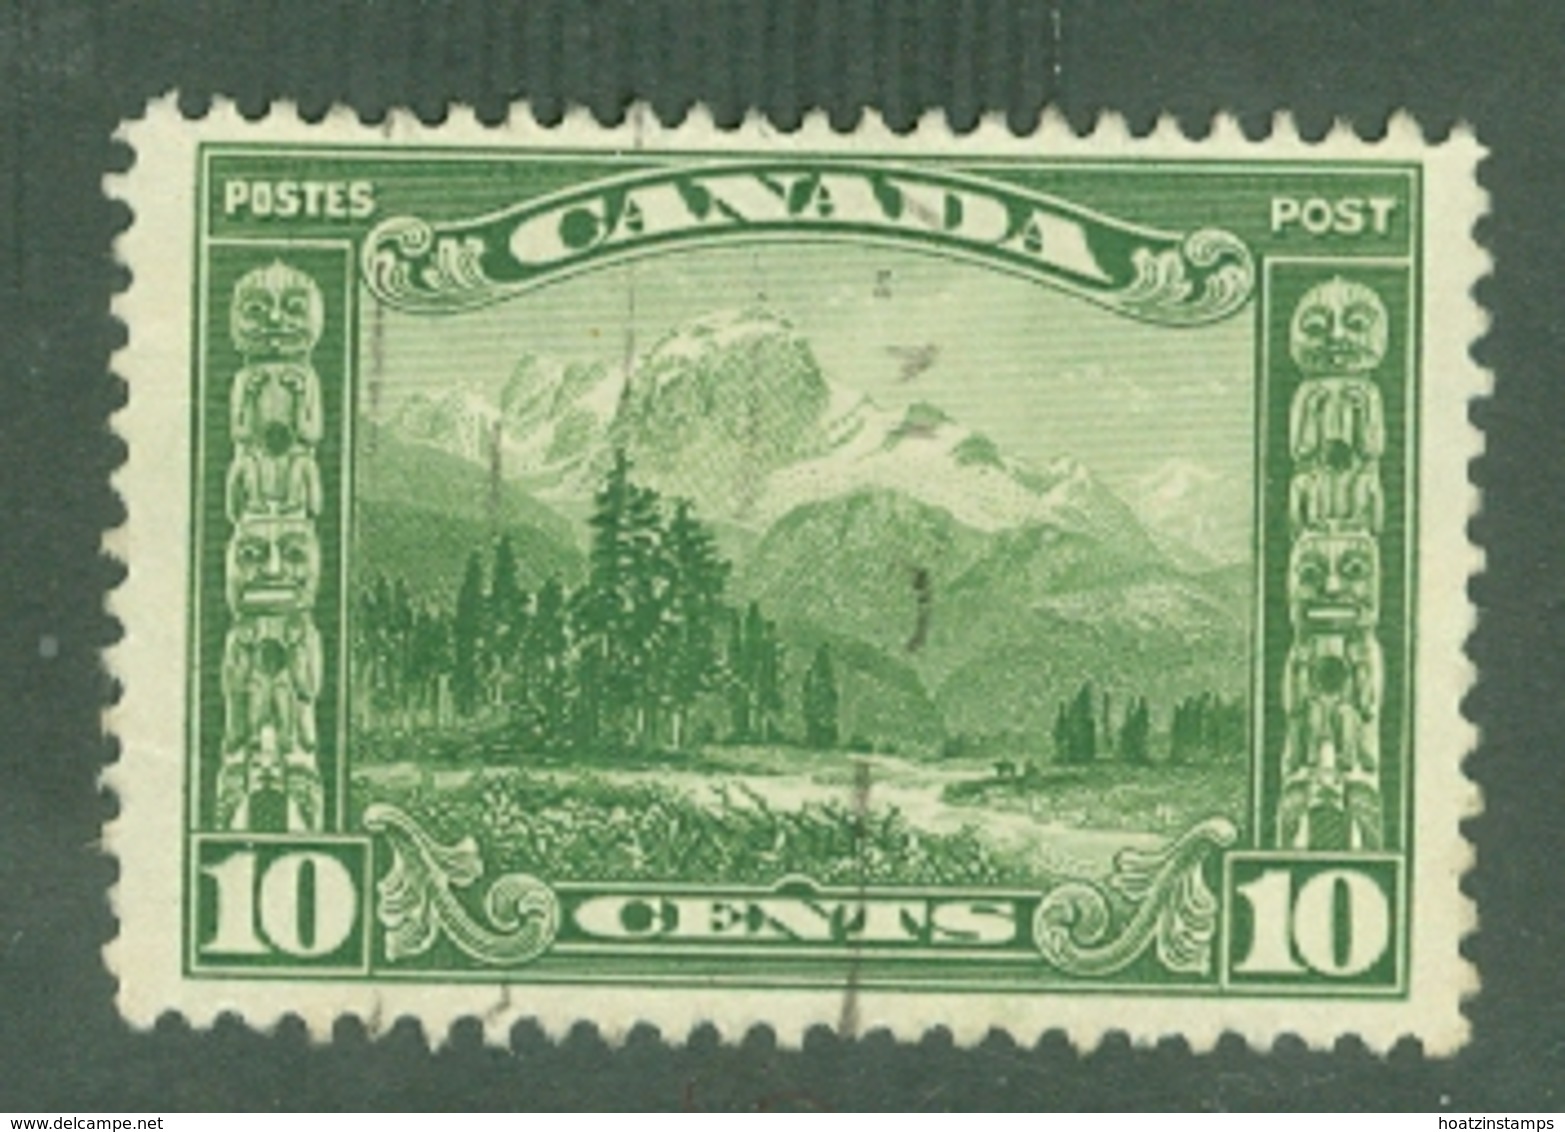 Canada: 1928/29   KGV - Pictorial   SG281    10c     Used - Used Stamps